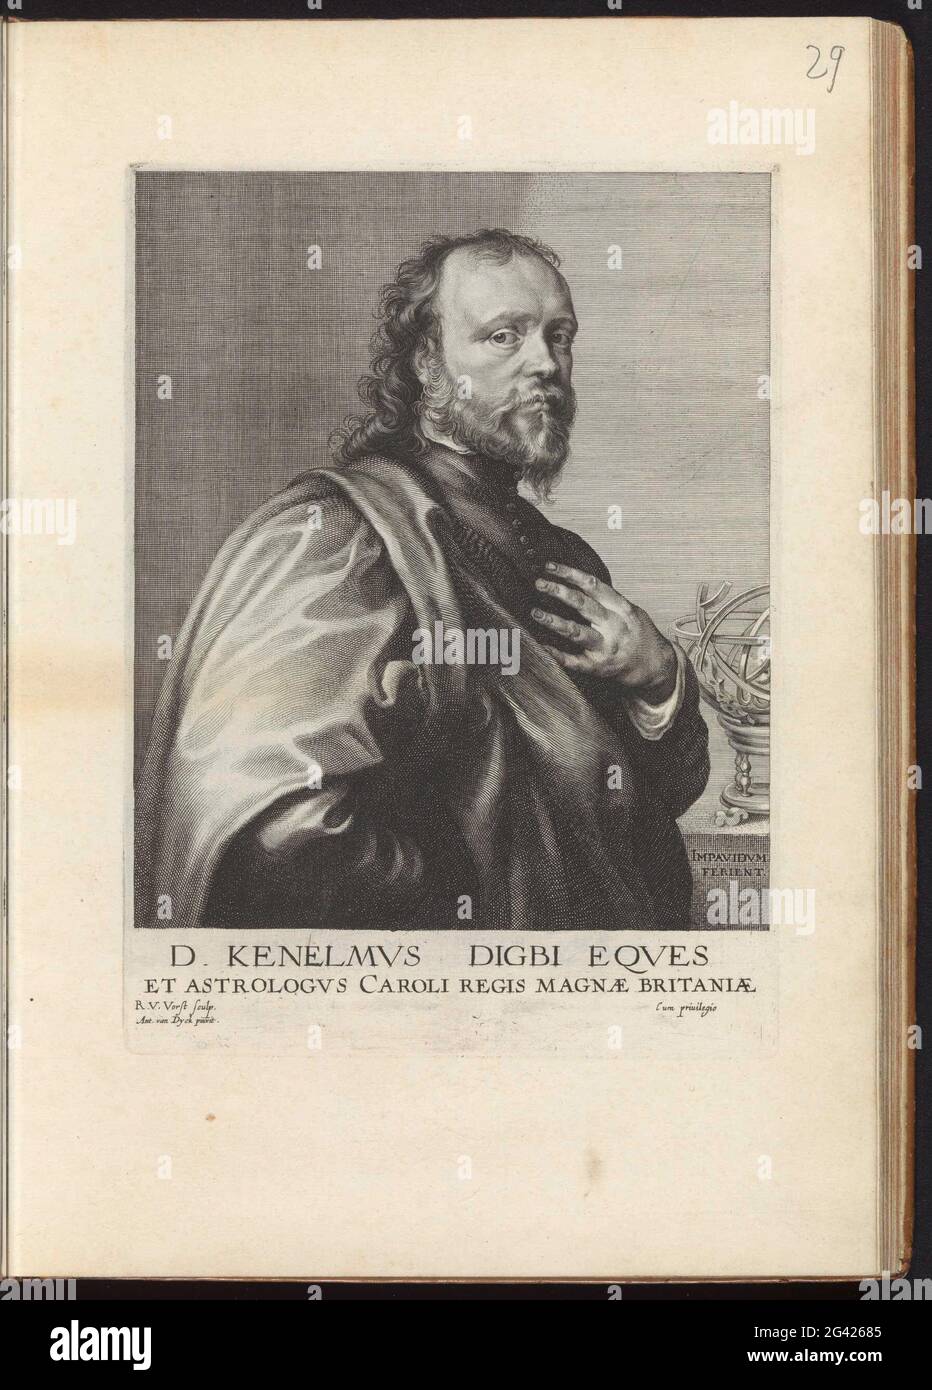 Portrait of kenelm digby; ICONES Principum Vivorum Doctor Pictation Chalcographorum Statuario NEC Non Amatorum Pictaniae Artis Numero Centum AB Antonio by Dyck Pictory Ad Vivum Expressae Eiusq: Sumptibus Aeri Incisae; Iconographie. Portet of the Sea Officer and Diplomat Kenelm Digby. There is an armillaire on the table, which refers to its interest in astronomy. This print is part of an album. Stock Photo